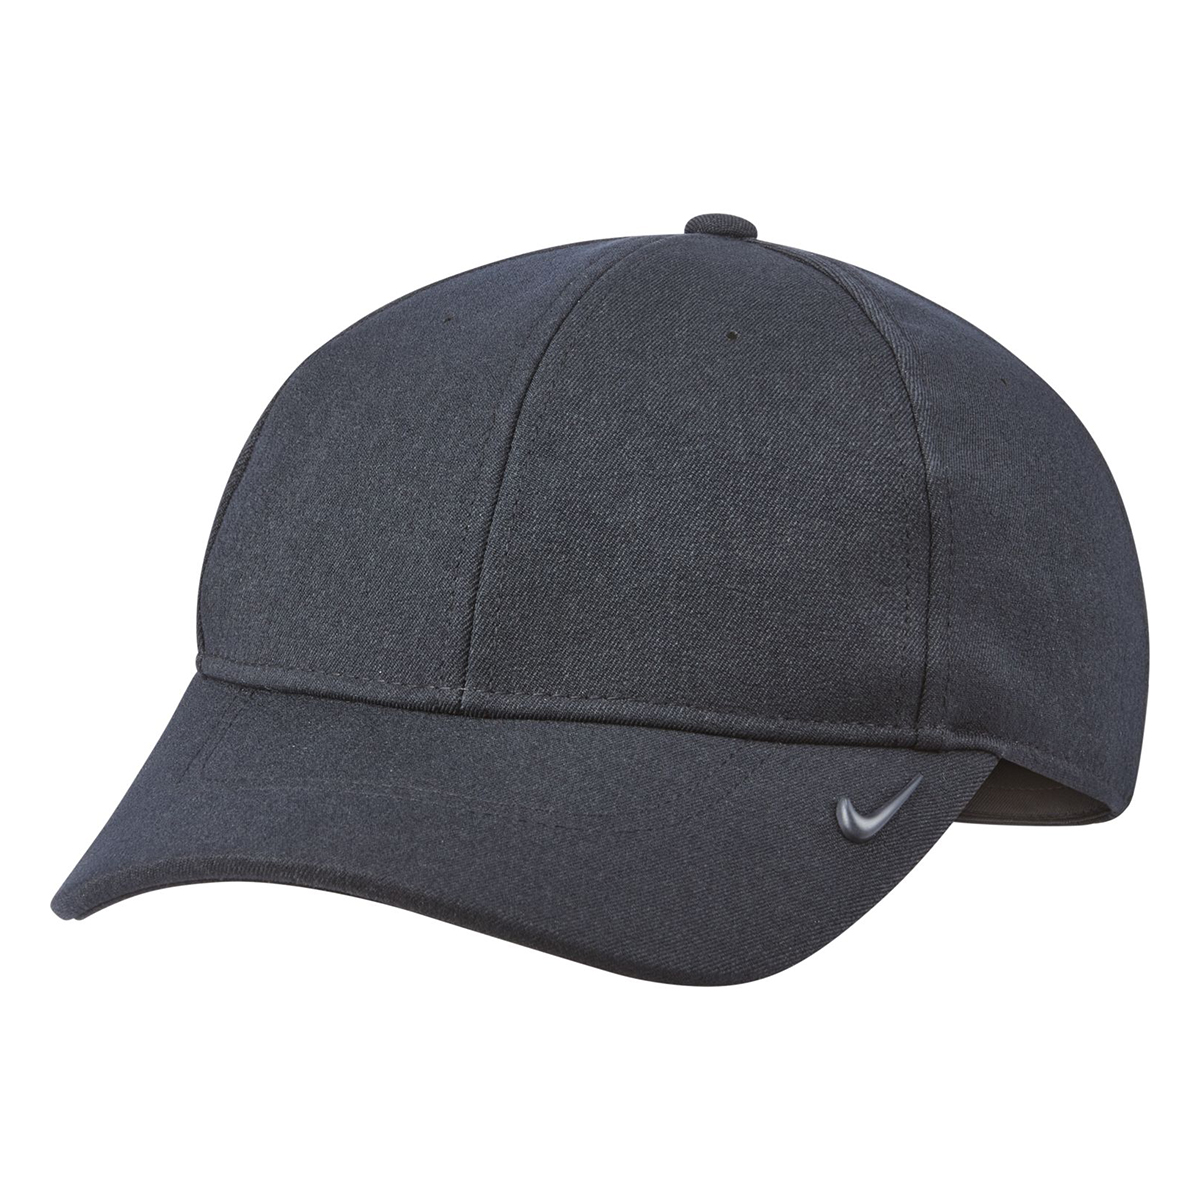 Nike Dri-FIT Aerobill One Cap, , large image number null